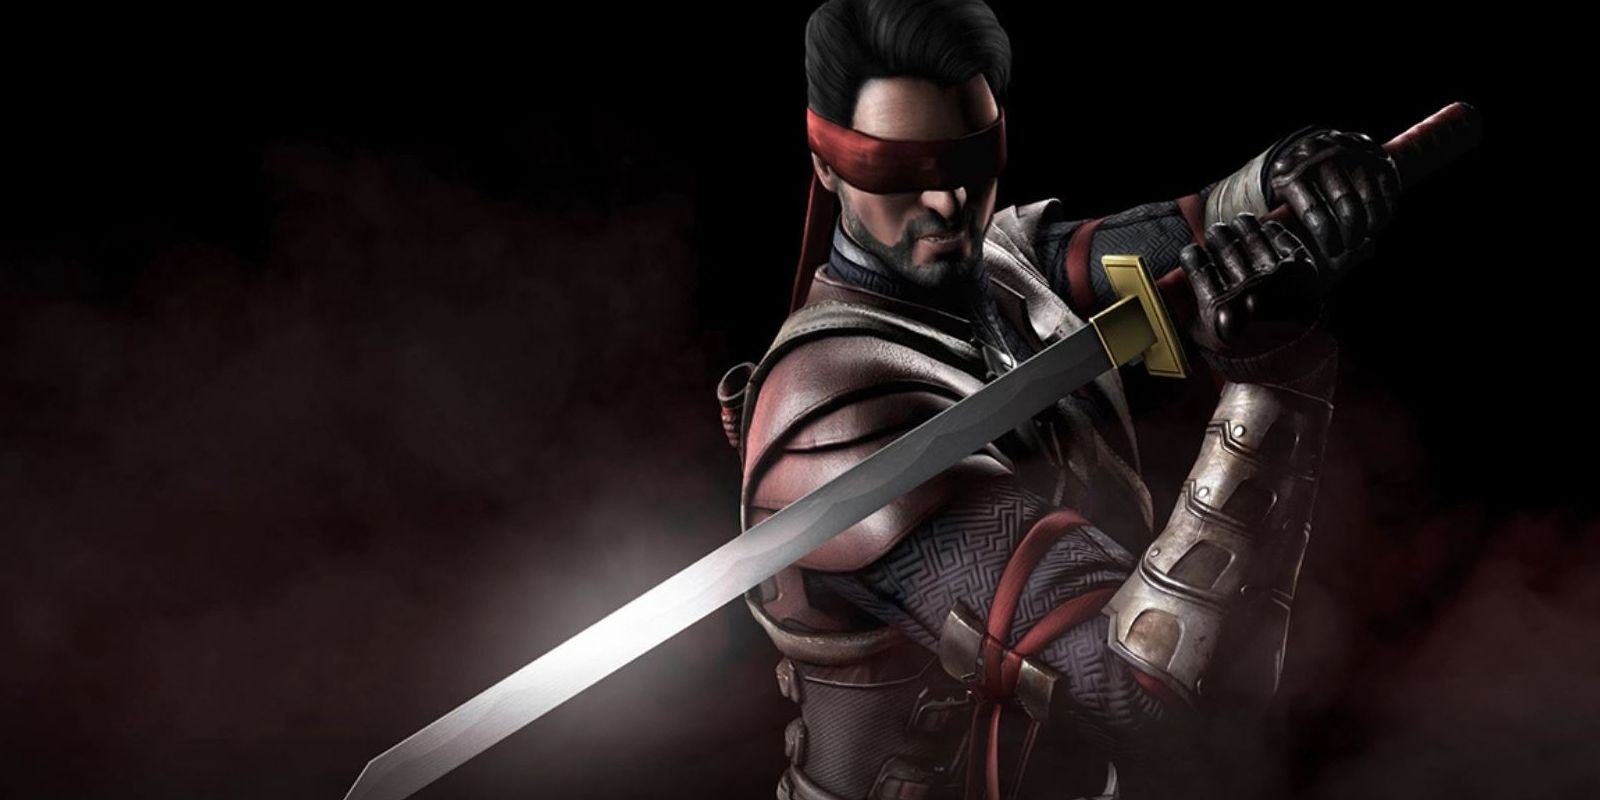 Kenshi from Mortal Kombat, with a red hood over his eyes and a sword in his hand.